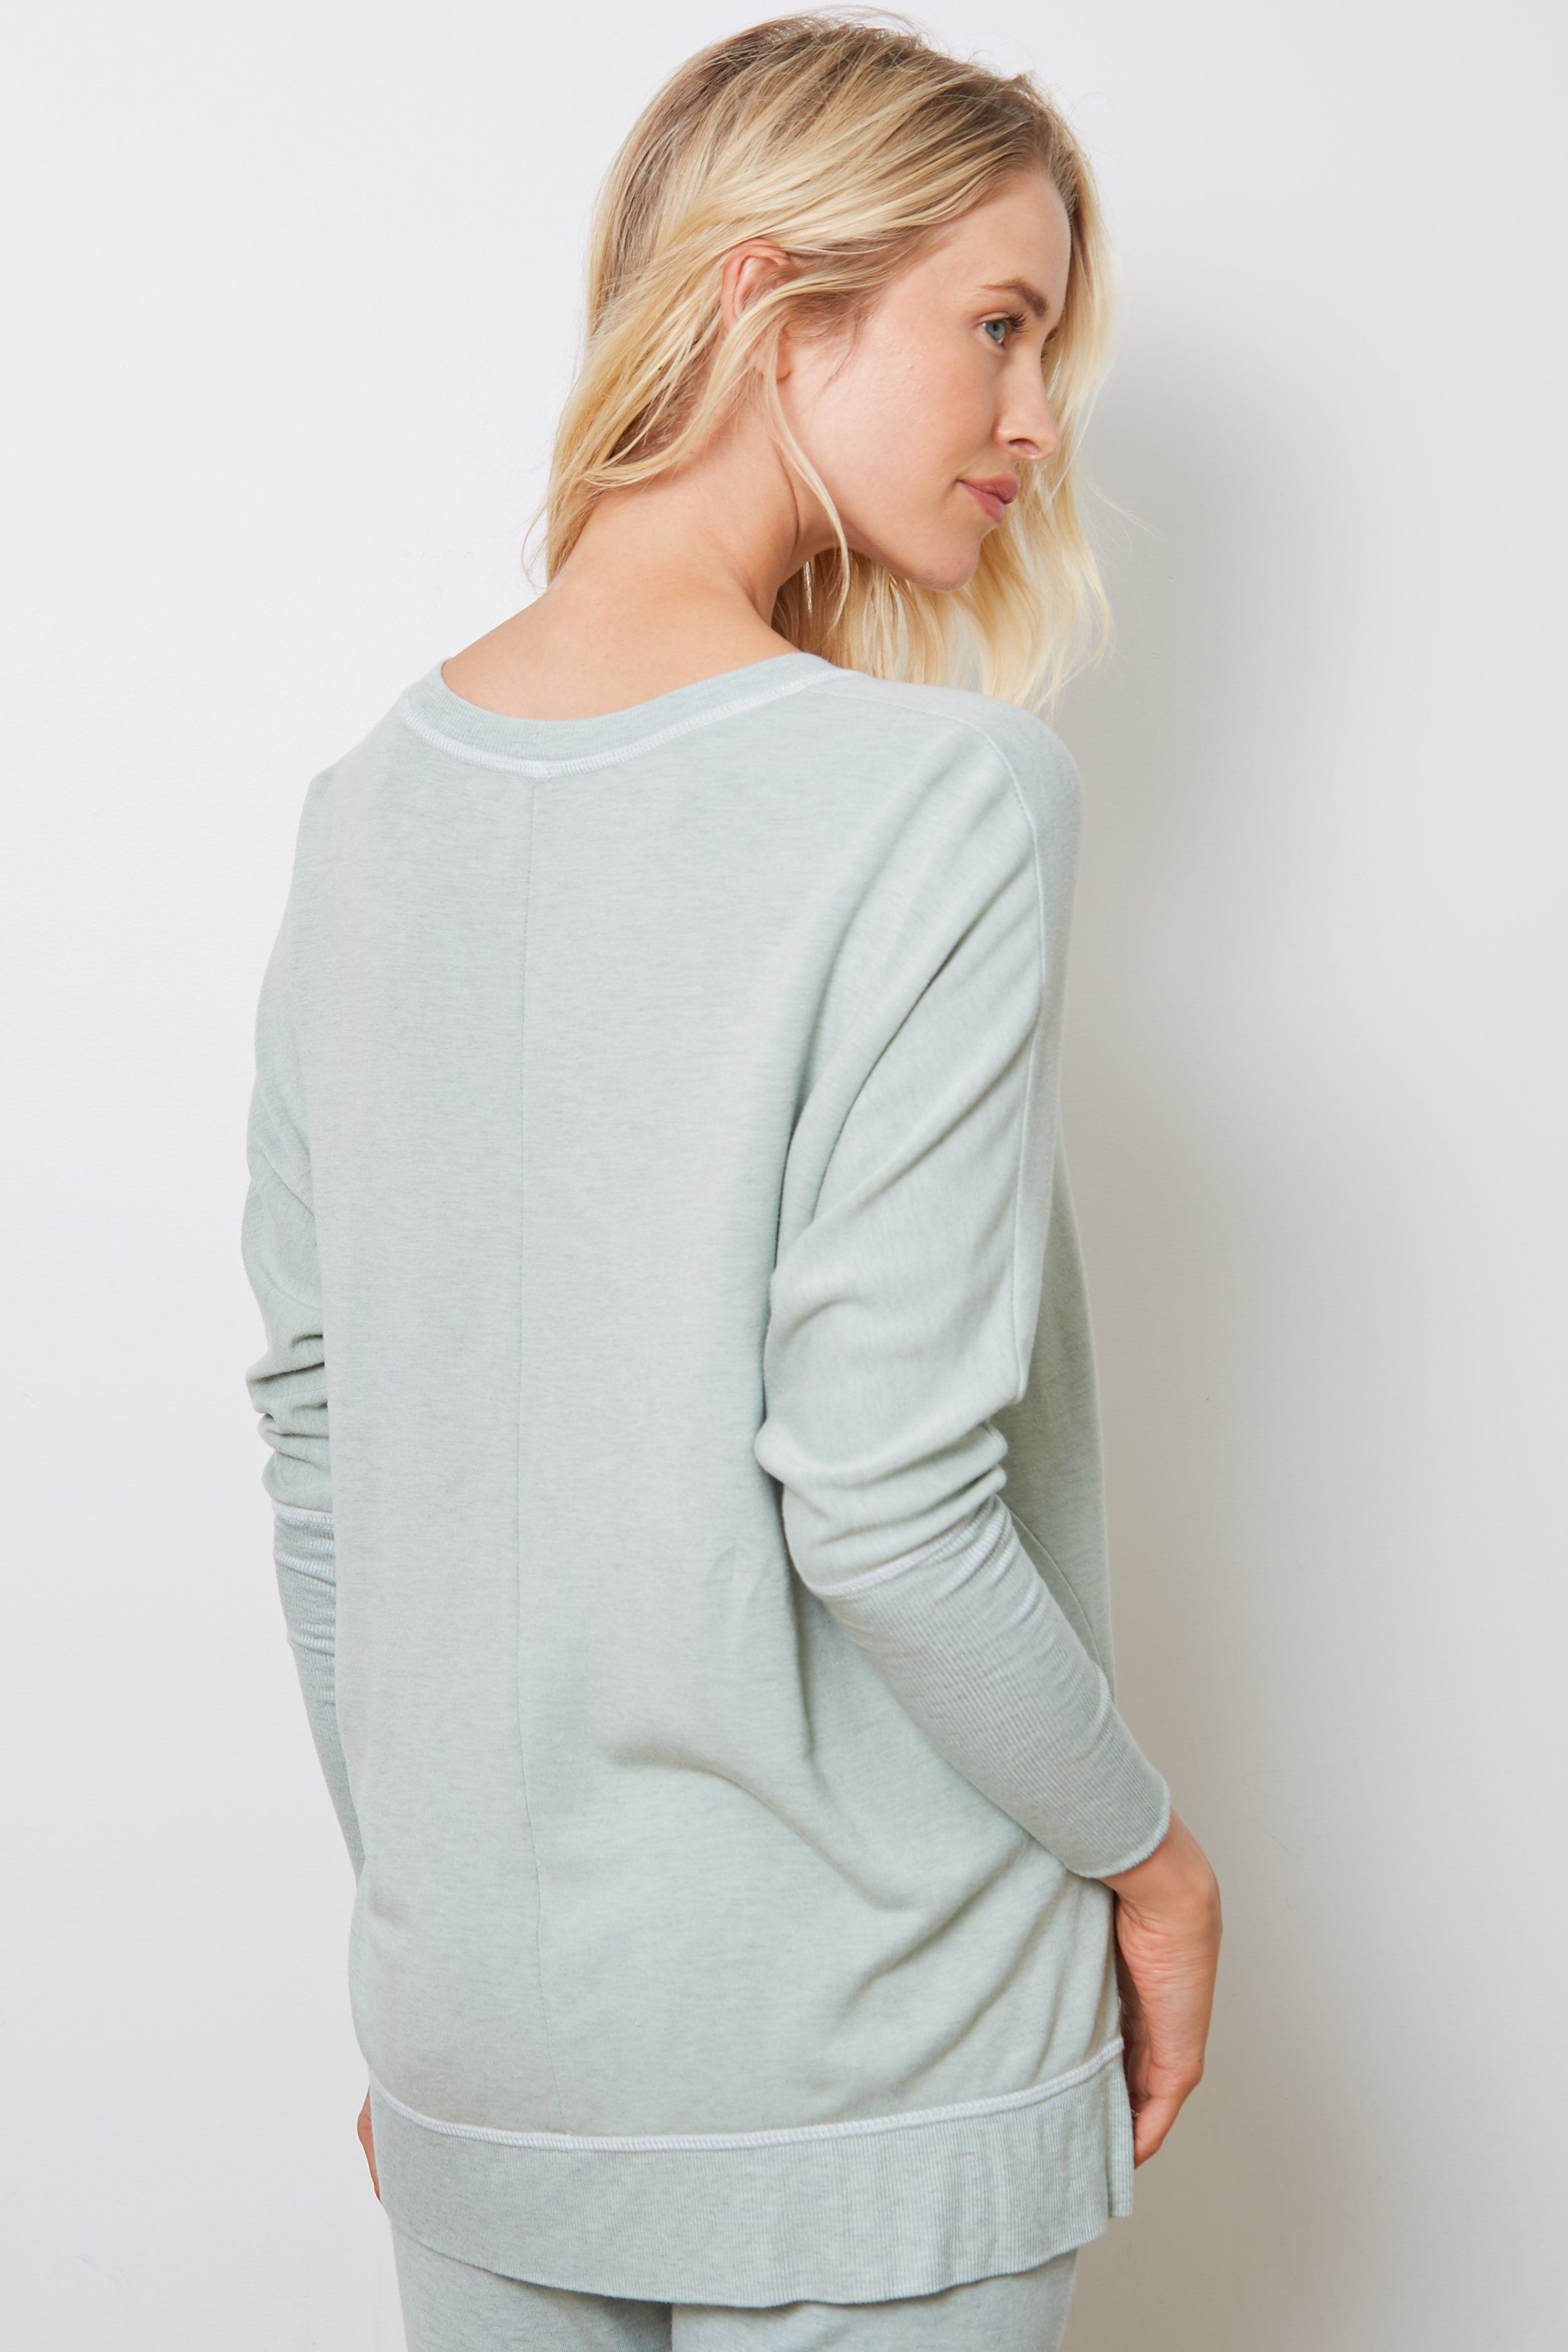 Good hYOUman Carrie Heart Sweater - Pistachio Clothing - Tops - Shirts - LS Knits by Good hYOUman | Grace the Boutique